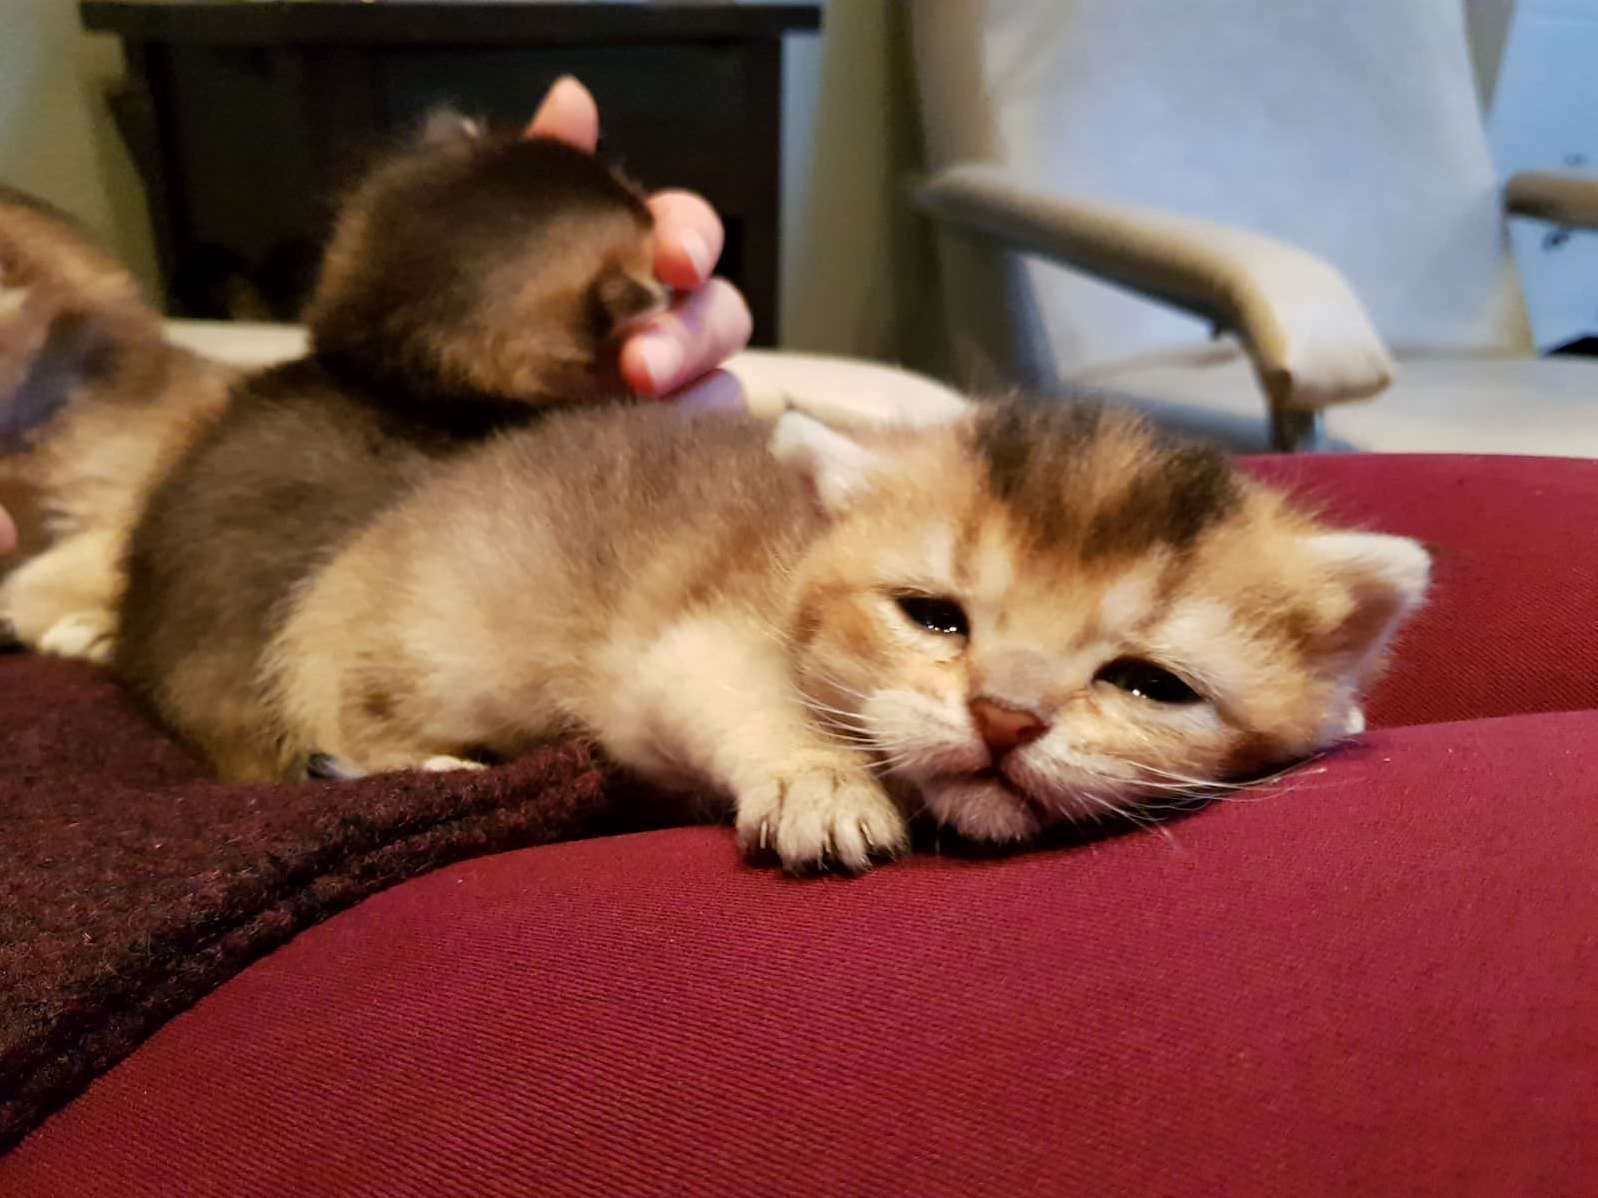 My friends cat just had new kittens and ive been receiving pictures like this throughout the whole day.